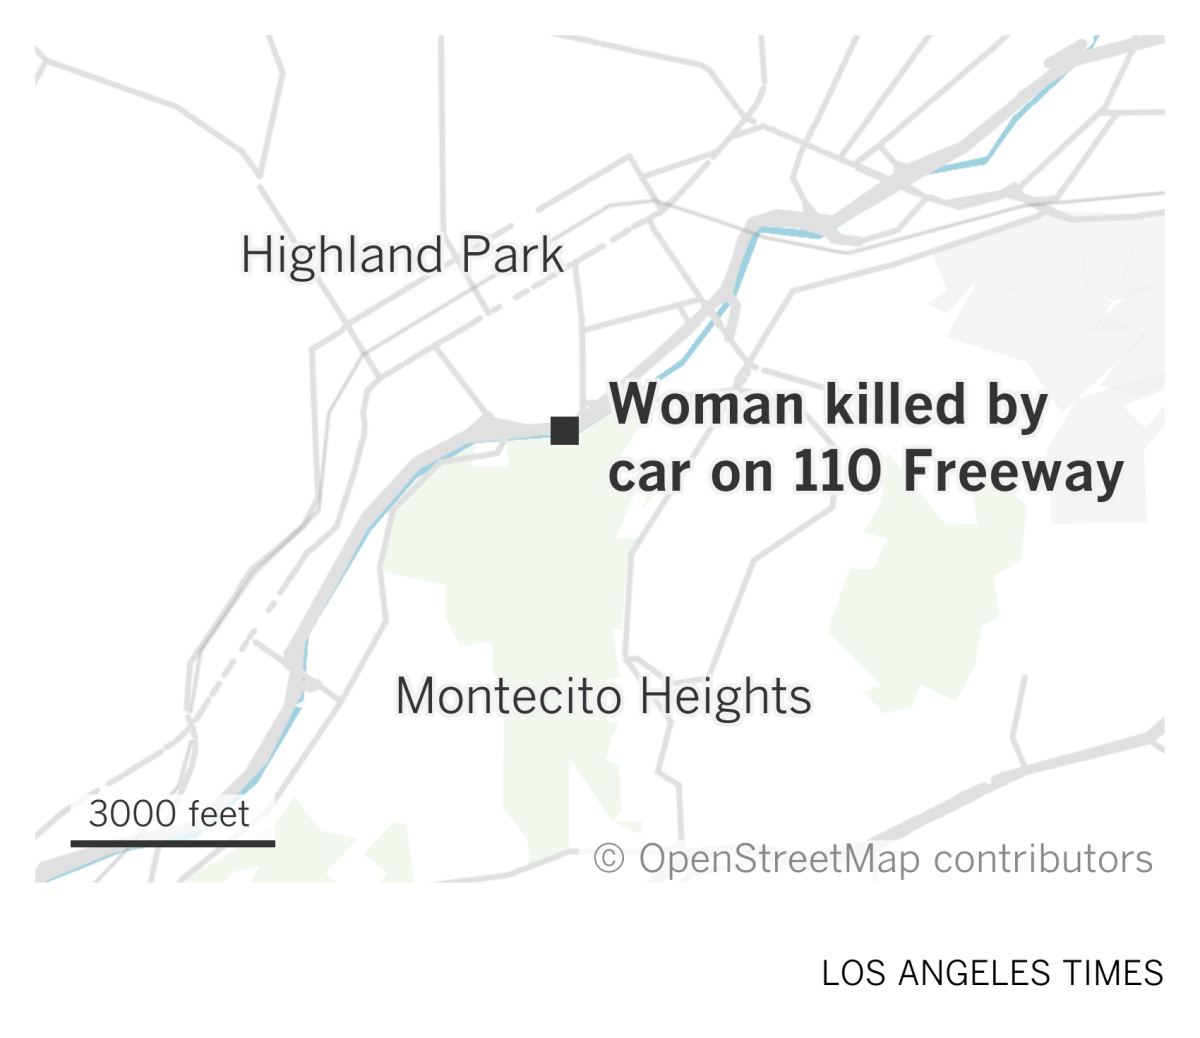 A map of Highland Park showing the location where a woman was killed by a car on the 110 Freeway